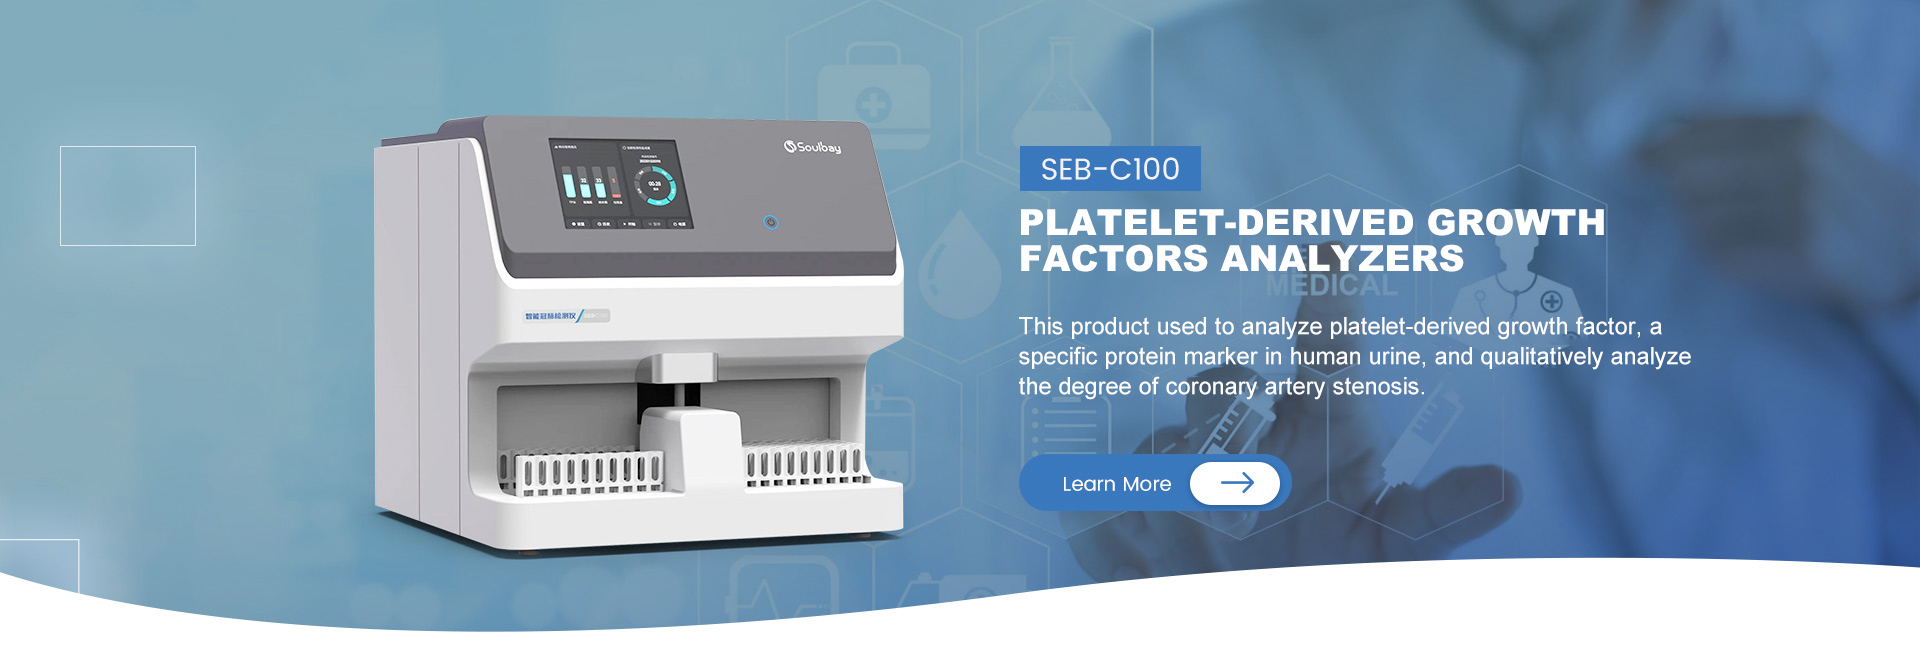  Platelet-Derived Growth Factors Analyzers